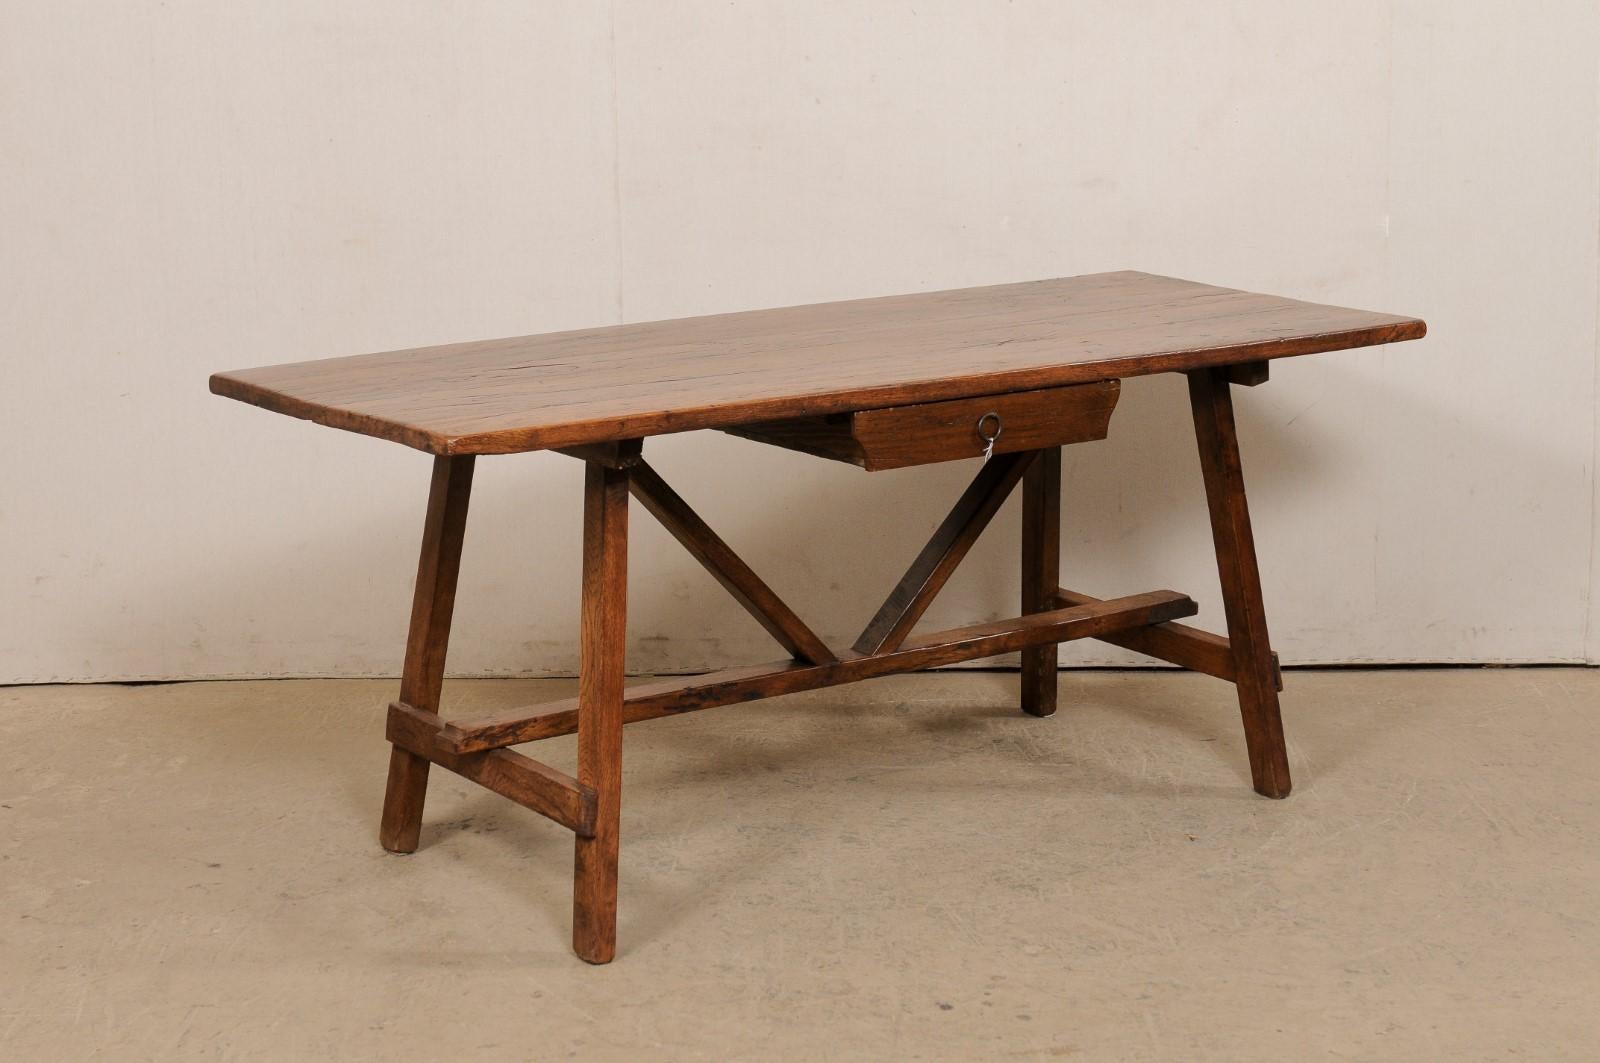 An Italian walnut wood table from the early 18th century. This antique table from Italy has a rectangular-shaped top (with single drawer set at one long side at center), which is raised on a pair of tilted, saw-horse style legs at either far end,